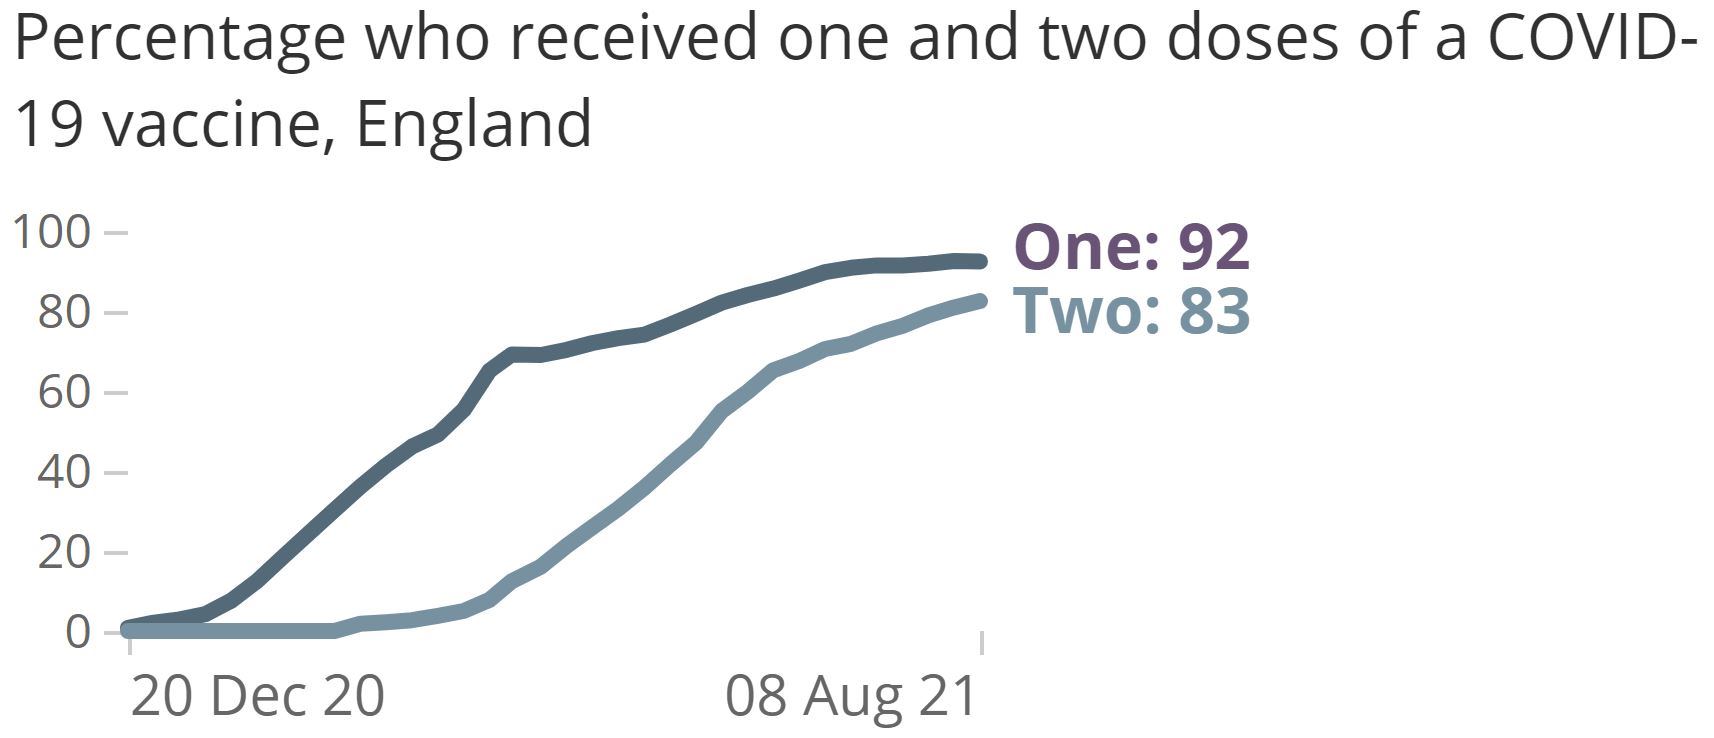 ONS Percentage received one and two doses of vaccine 8-8-2021 - enlarge